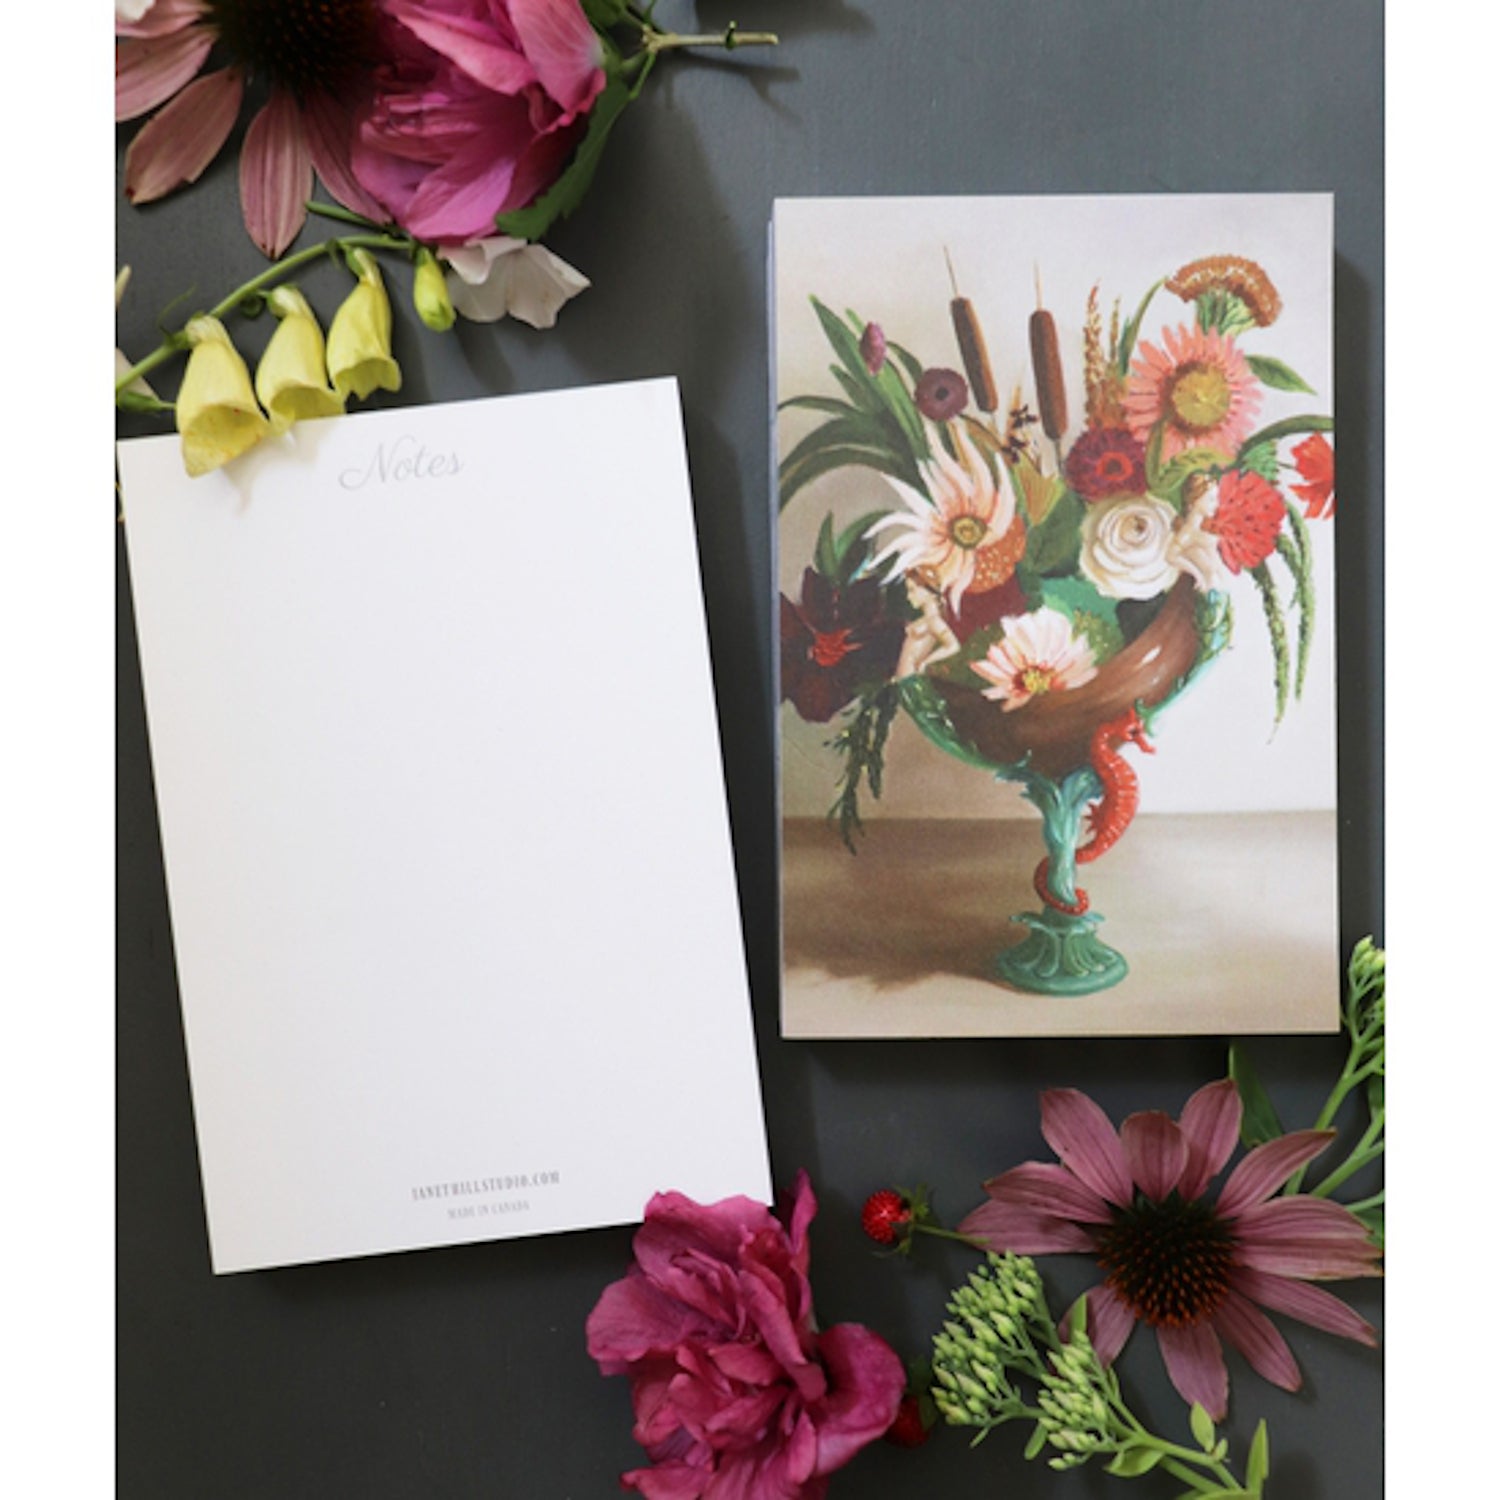 The &quot;Lost at Sea&quot; Tear-Away Notepad resting on a table with flowers, next to a single removed sheet flipped over to show the blank white back side labeled &quot;Notes&quot; at the top. The artwork is a painterly illustration of a bouquet of flowers and botanicals in an asymmetrical teal vase with an orange seahorse on the base, resting on a beige table.